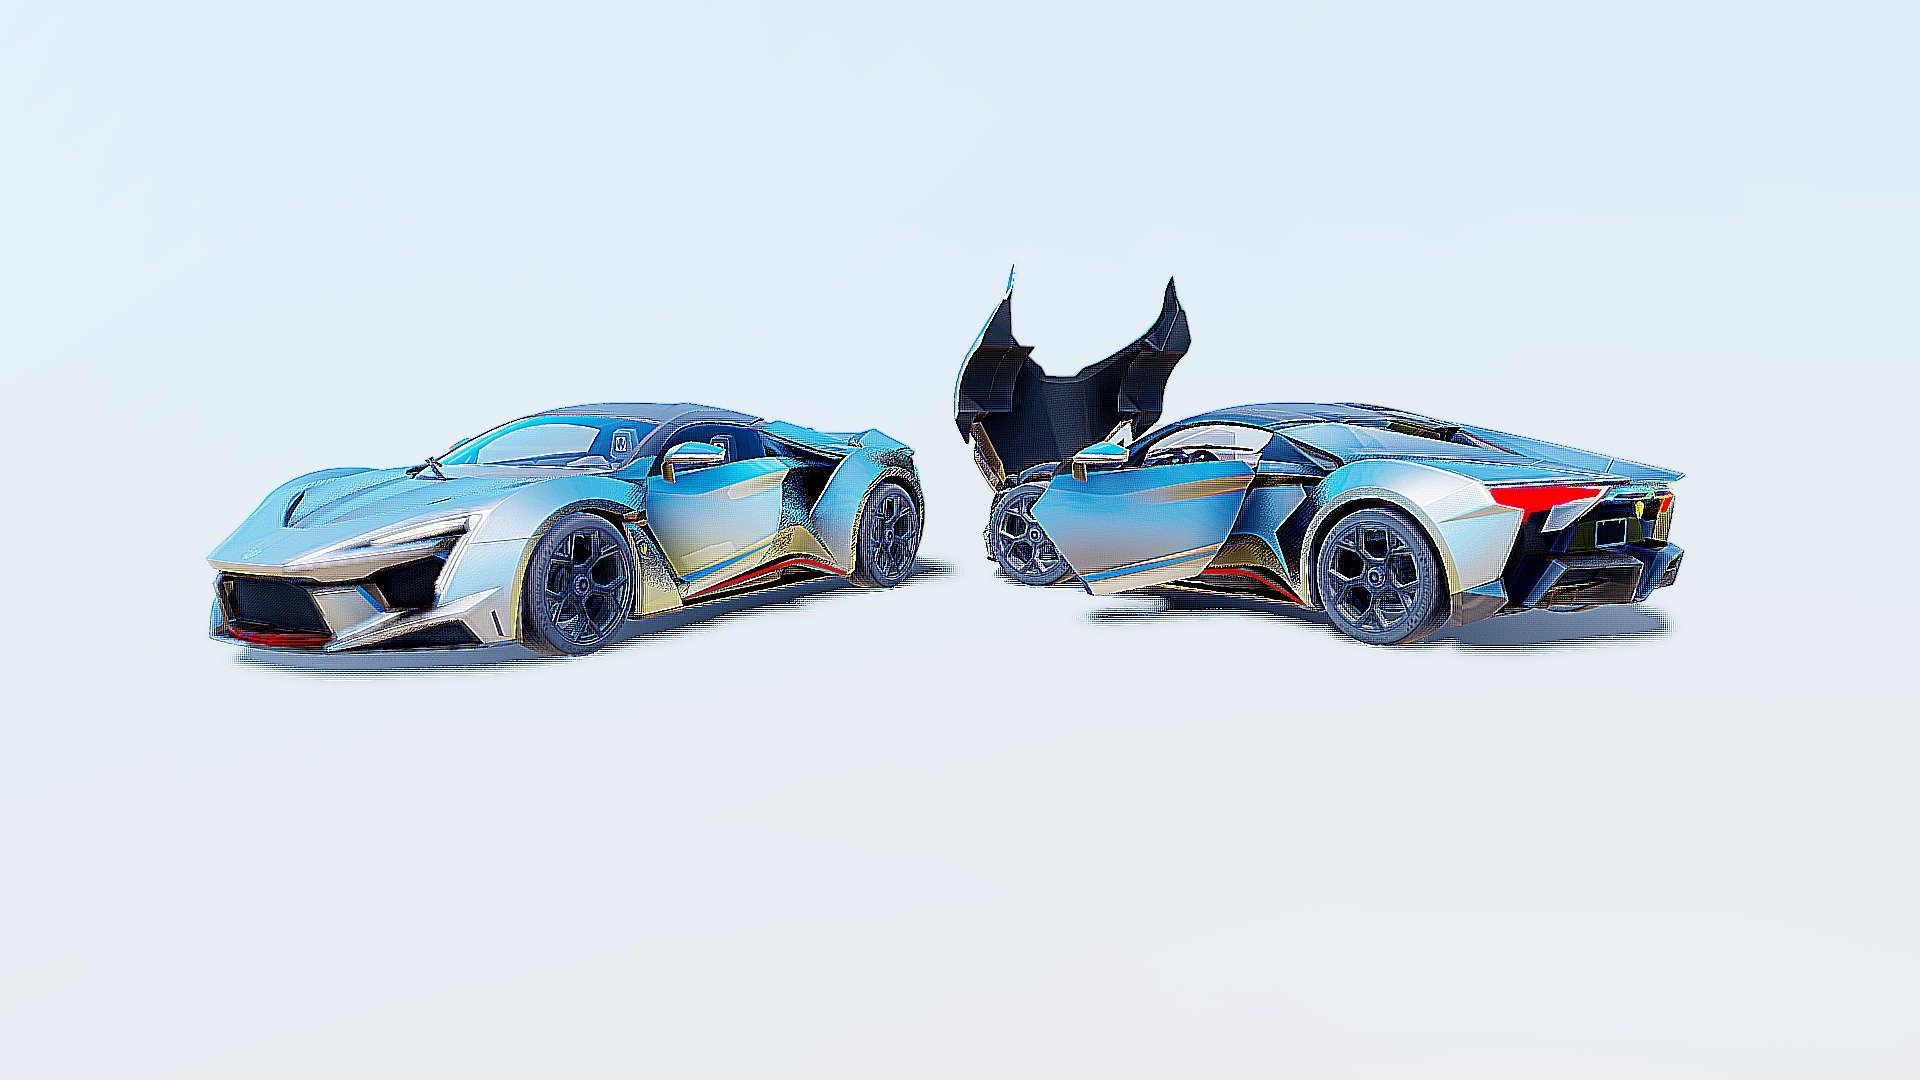 The Fenyr was initially planned with a production cap of 25 vehicles per year, however, this was later reduced to 100 vehicles, plus 10 launch versions.

On July 31, 2019, W Motors announced on social media that the last 5 launch editions of the car had been sold to an unnamed Japanese businessman. Media reports later revealed that the buyer was Tetsumi Shinchi. This means that at least 10 vehicles have been allocated.

Multiple sources have also noted that the launch version of Shinchi will be showcased at the Mega Supercar Motor Show in 2021.

The Fenyr SuperSport is the second model created by the manufacturer W Motors, a brand from Lebanon and headquartered in the United Arab Emirates. It is the second supercar produced by the manufacturer. This model was presented at the Dubai International Motor Show in November 2015 3d model